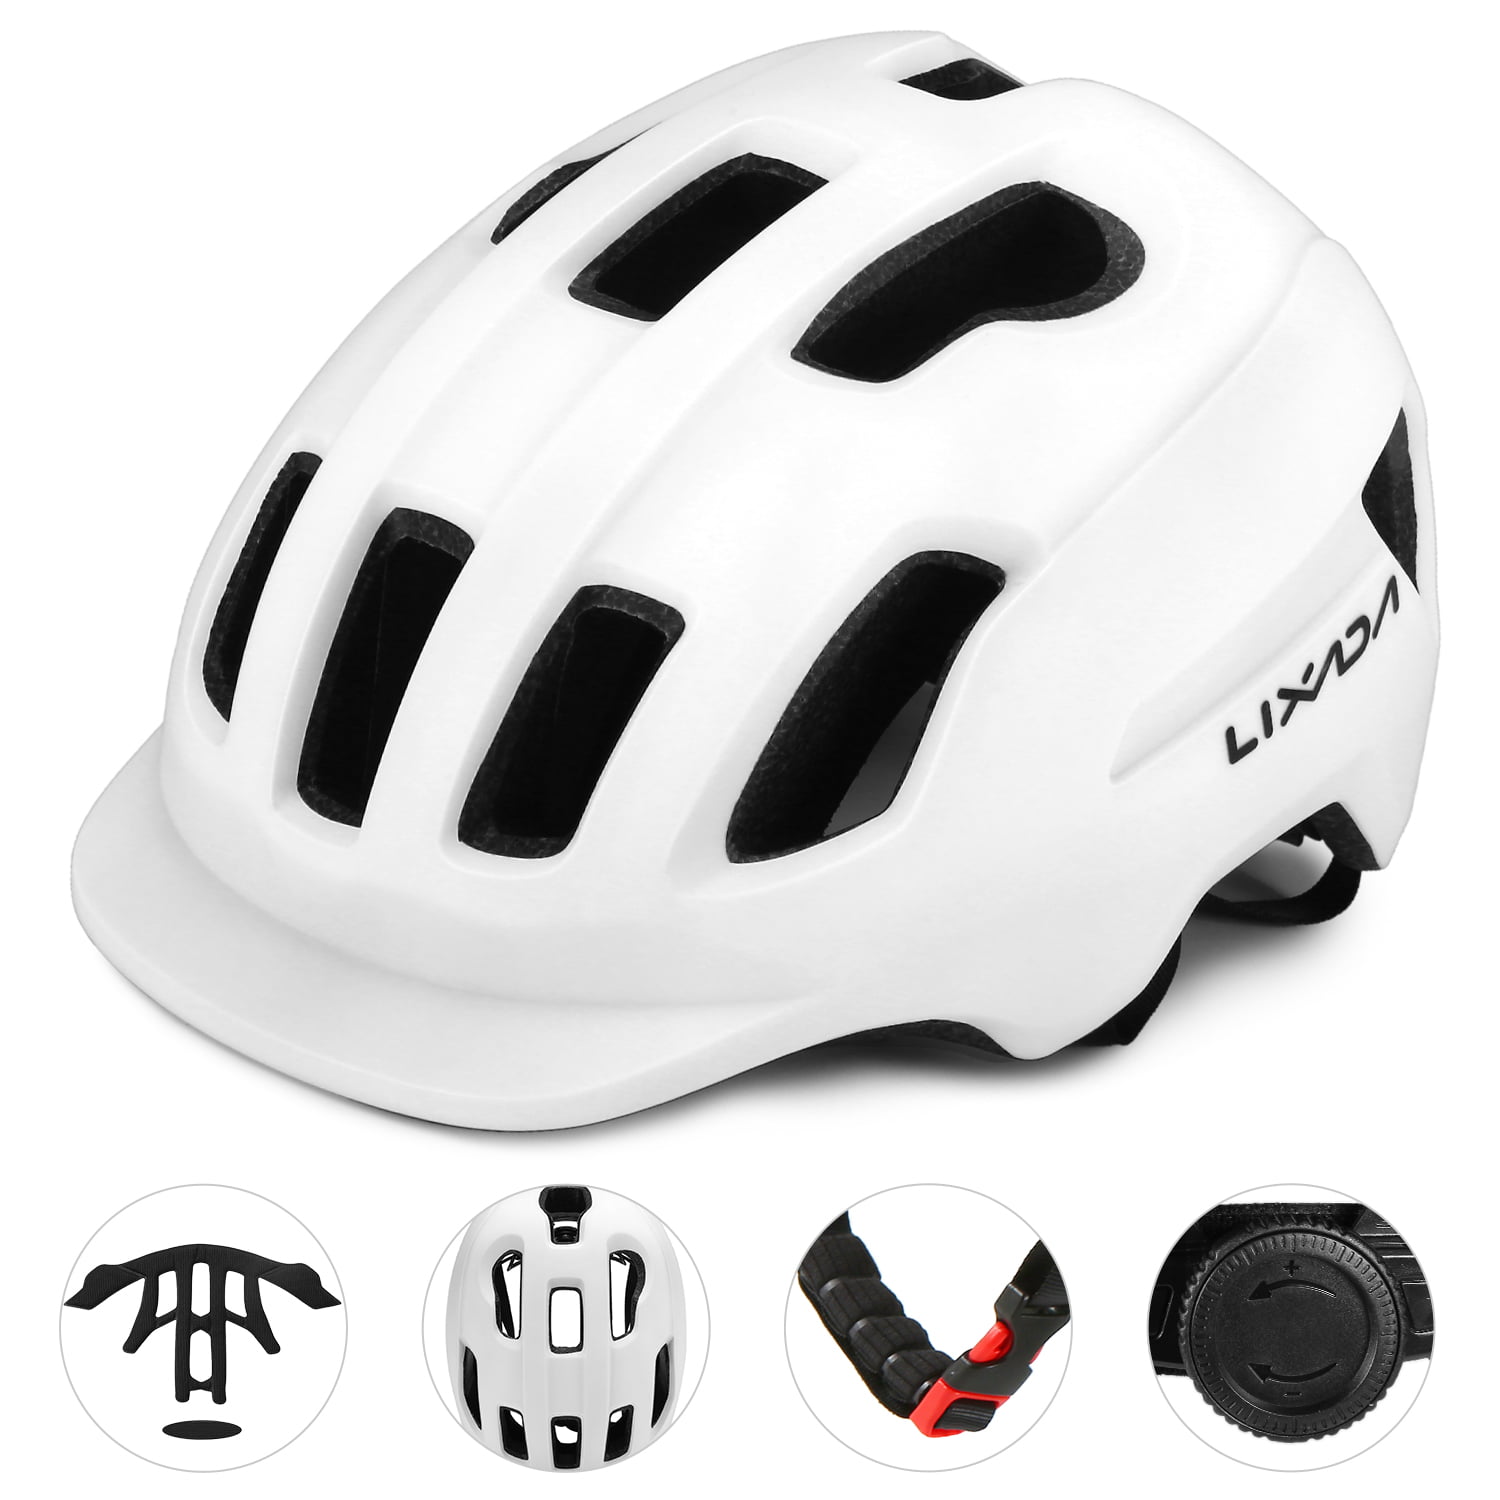 Details about   Bicycle Helmet Bike Cycling MTB Adjustable Unisex Safety Outdoor Sports Helmets 